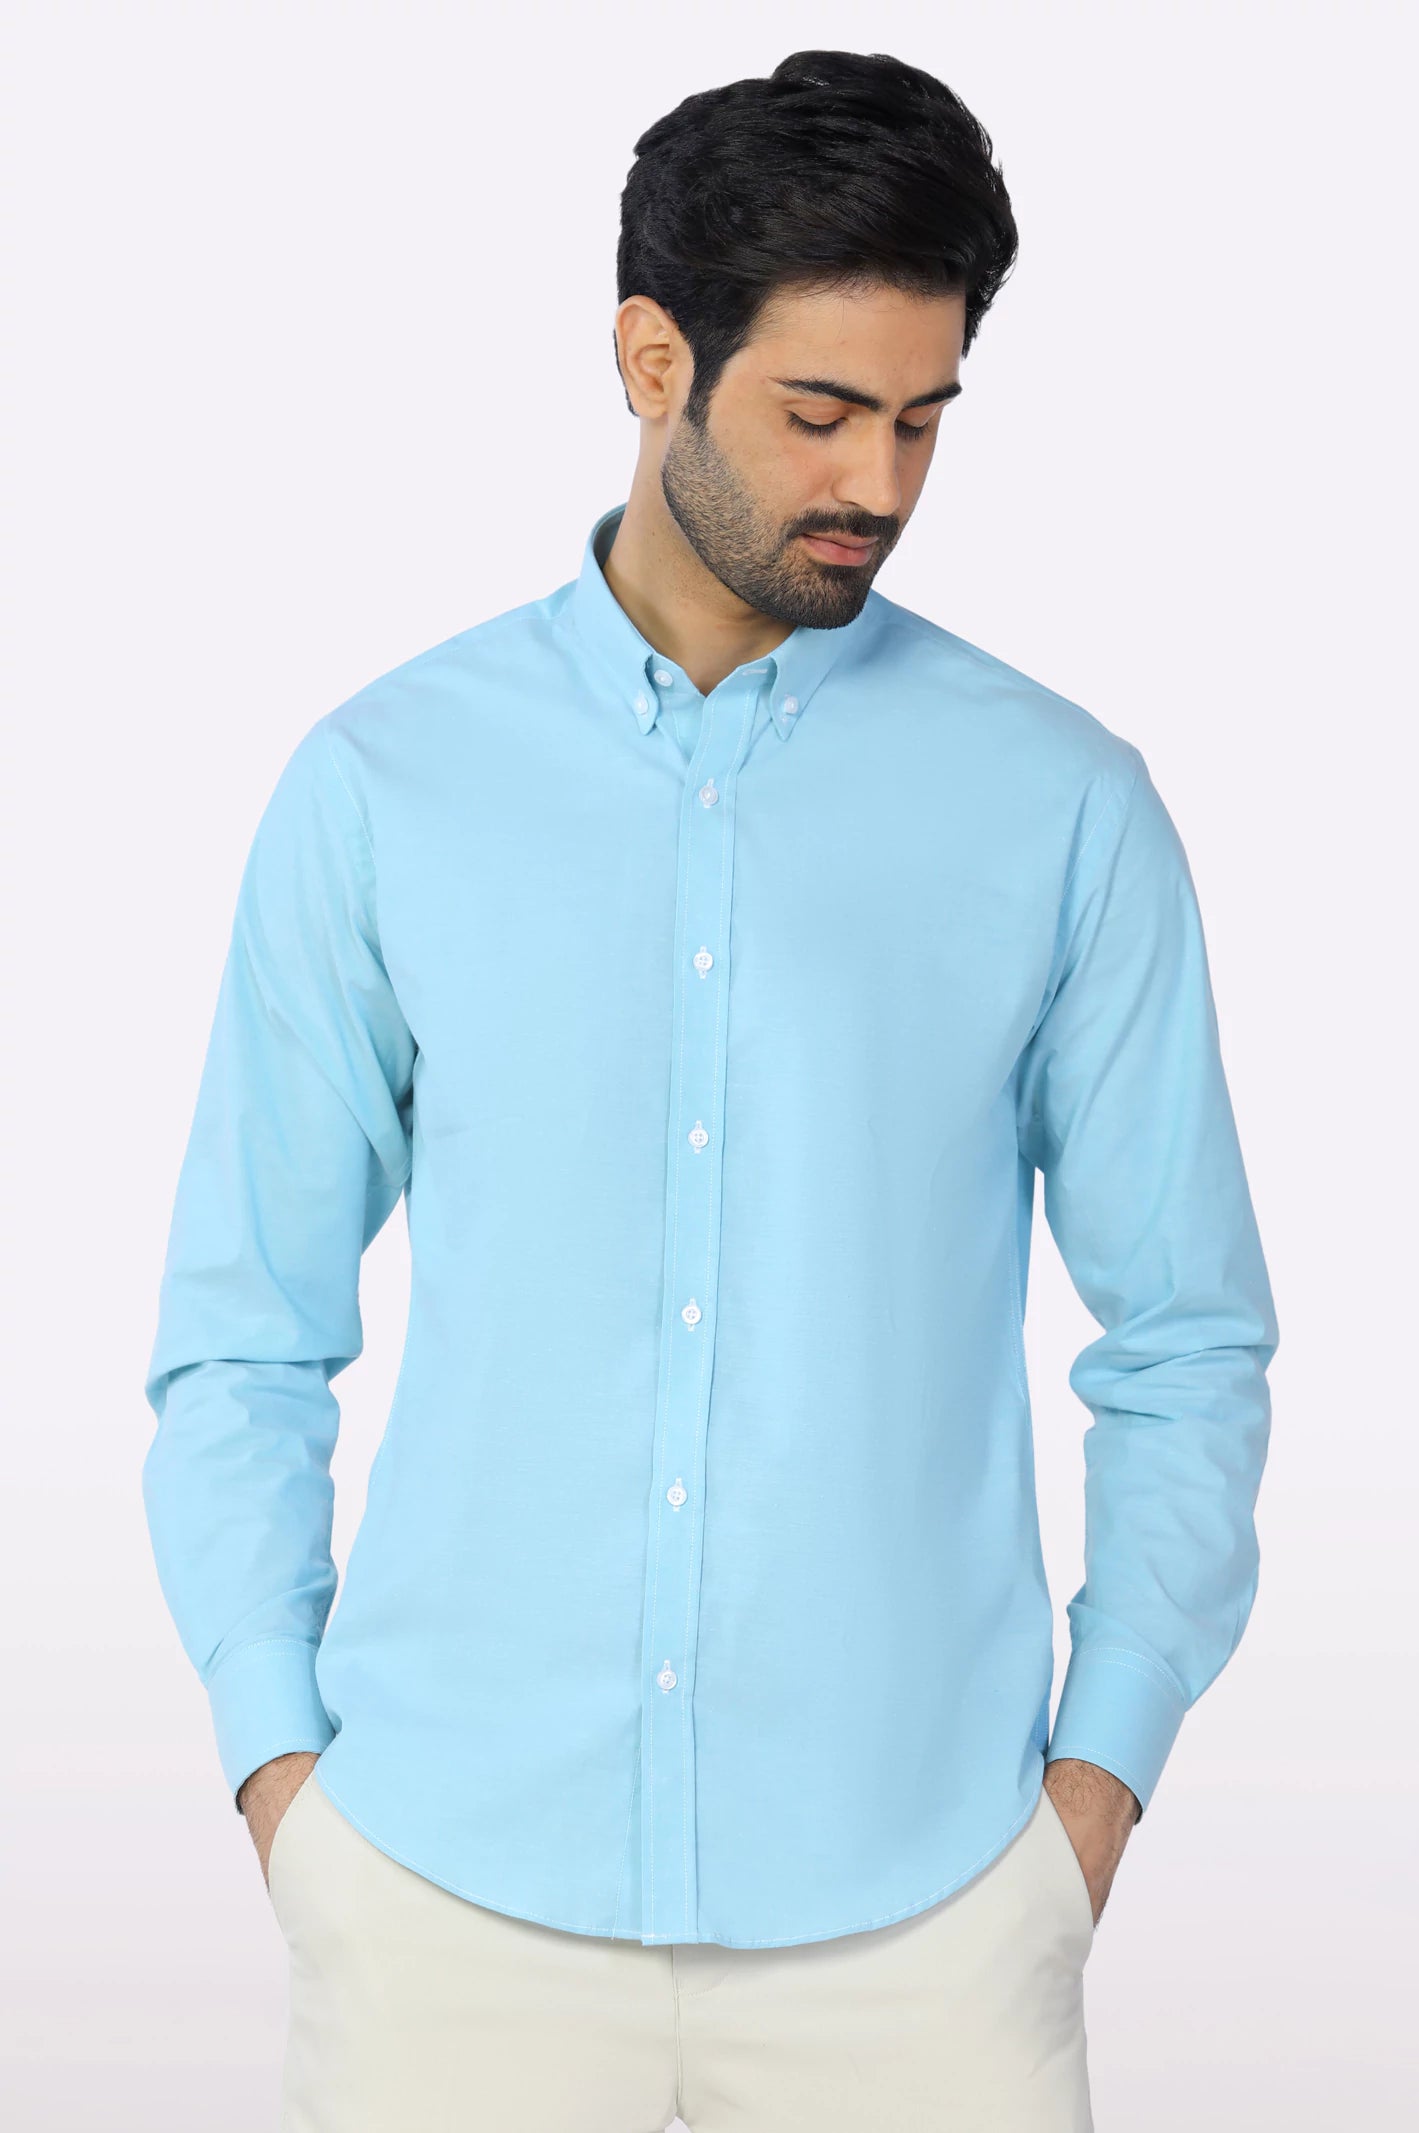 Blue Plain Casual Shirt From Diners